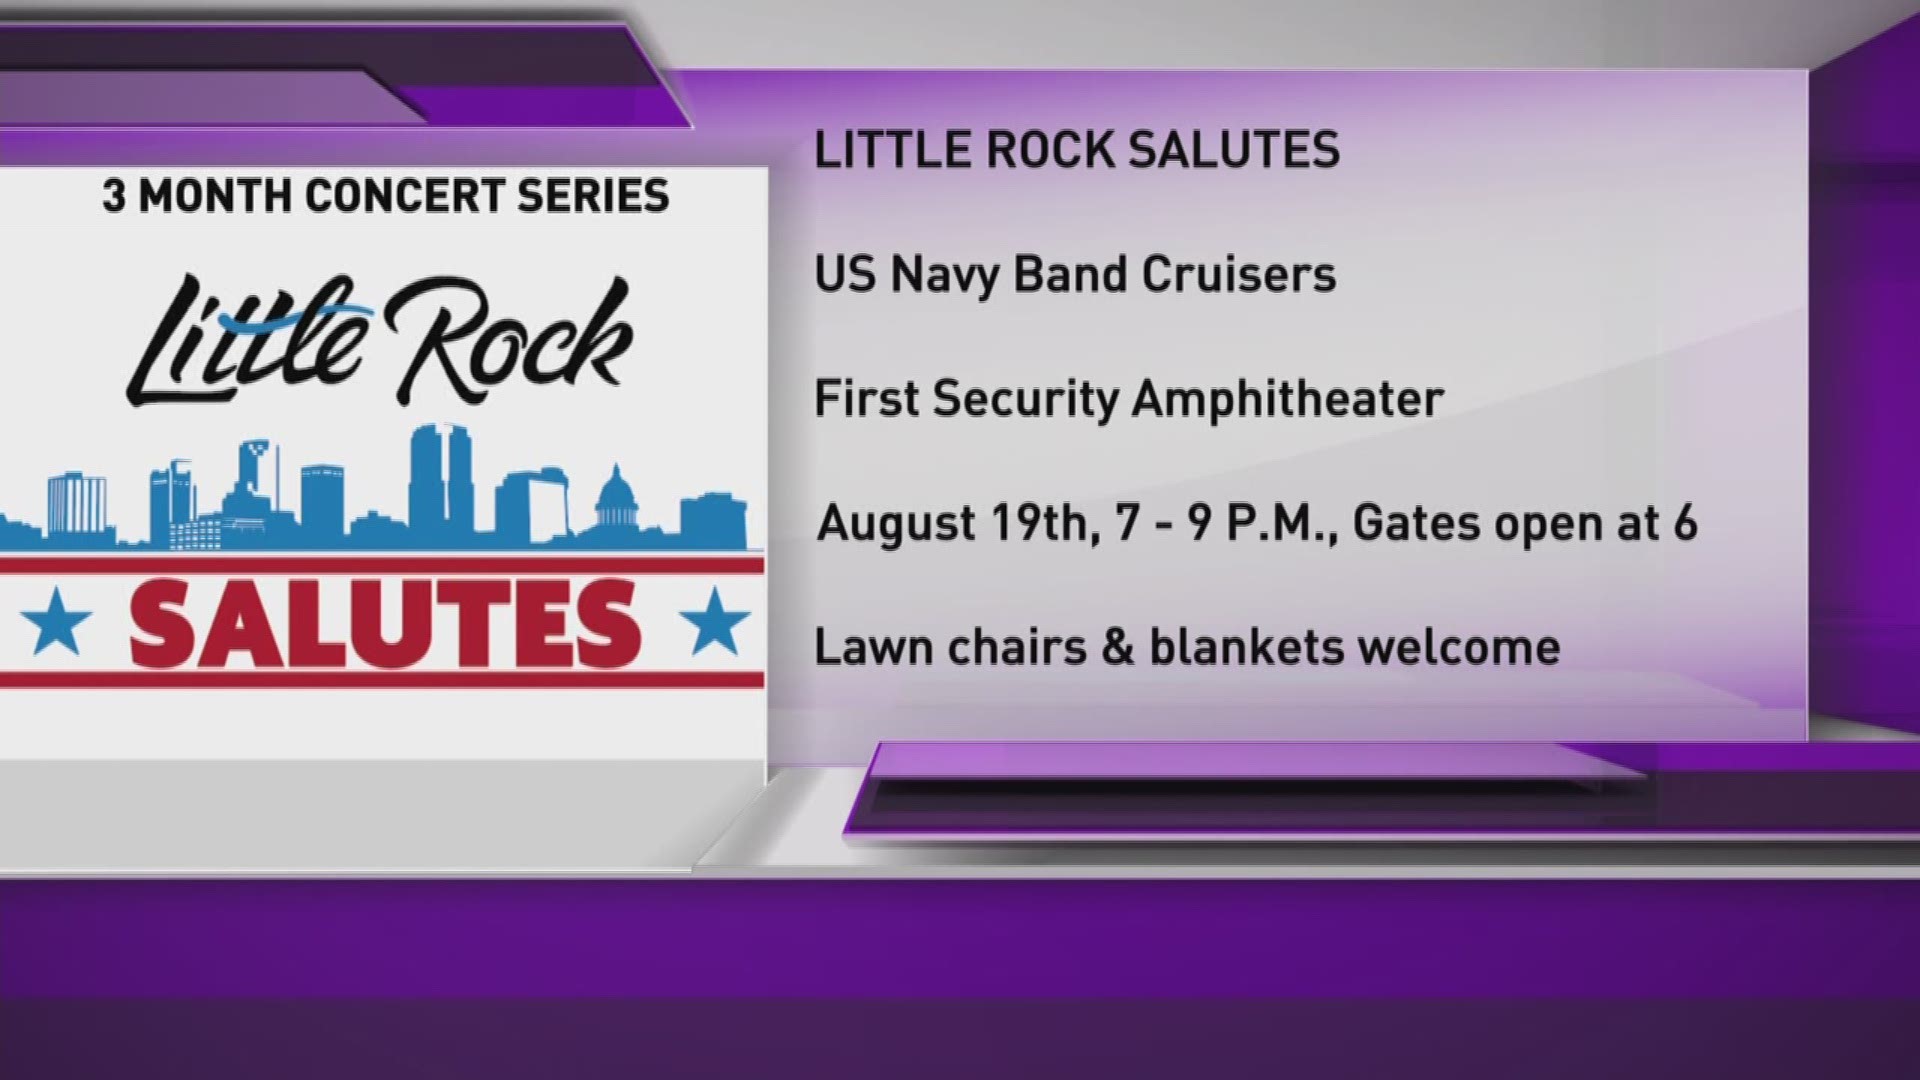 Three nationally and regionally recognized military bands will be featured over the next three months in a concert series called Little Rock Salutes